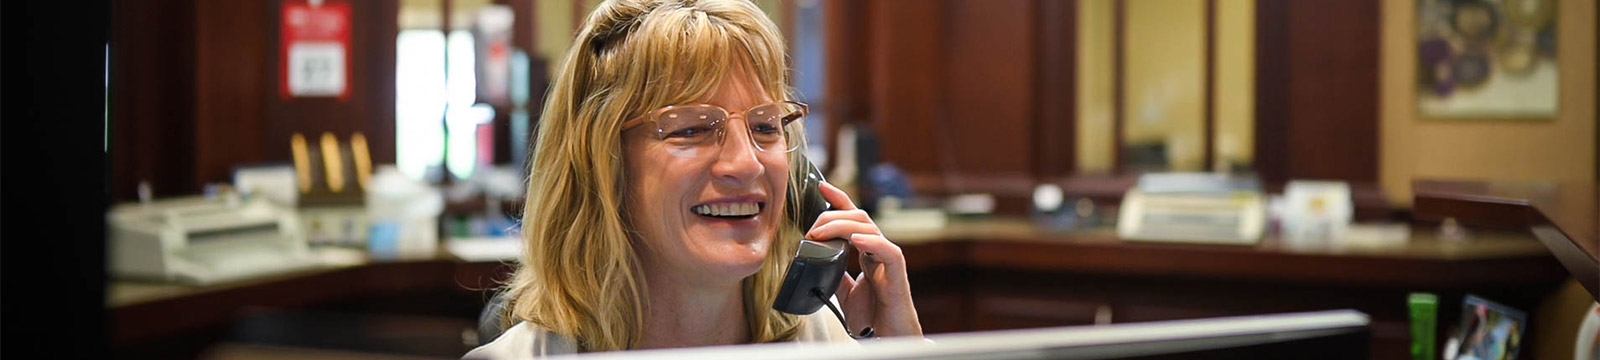 CSB employee answering the phone.